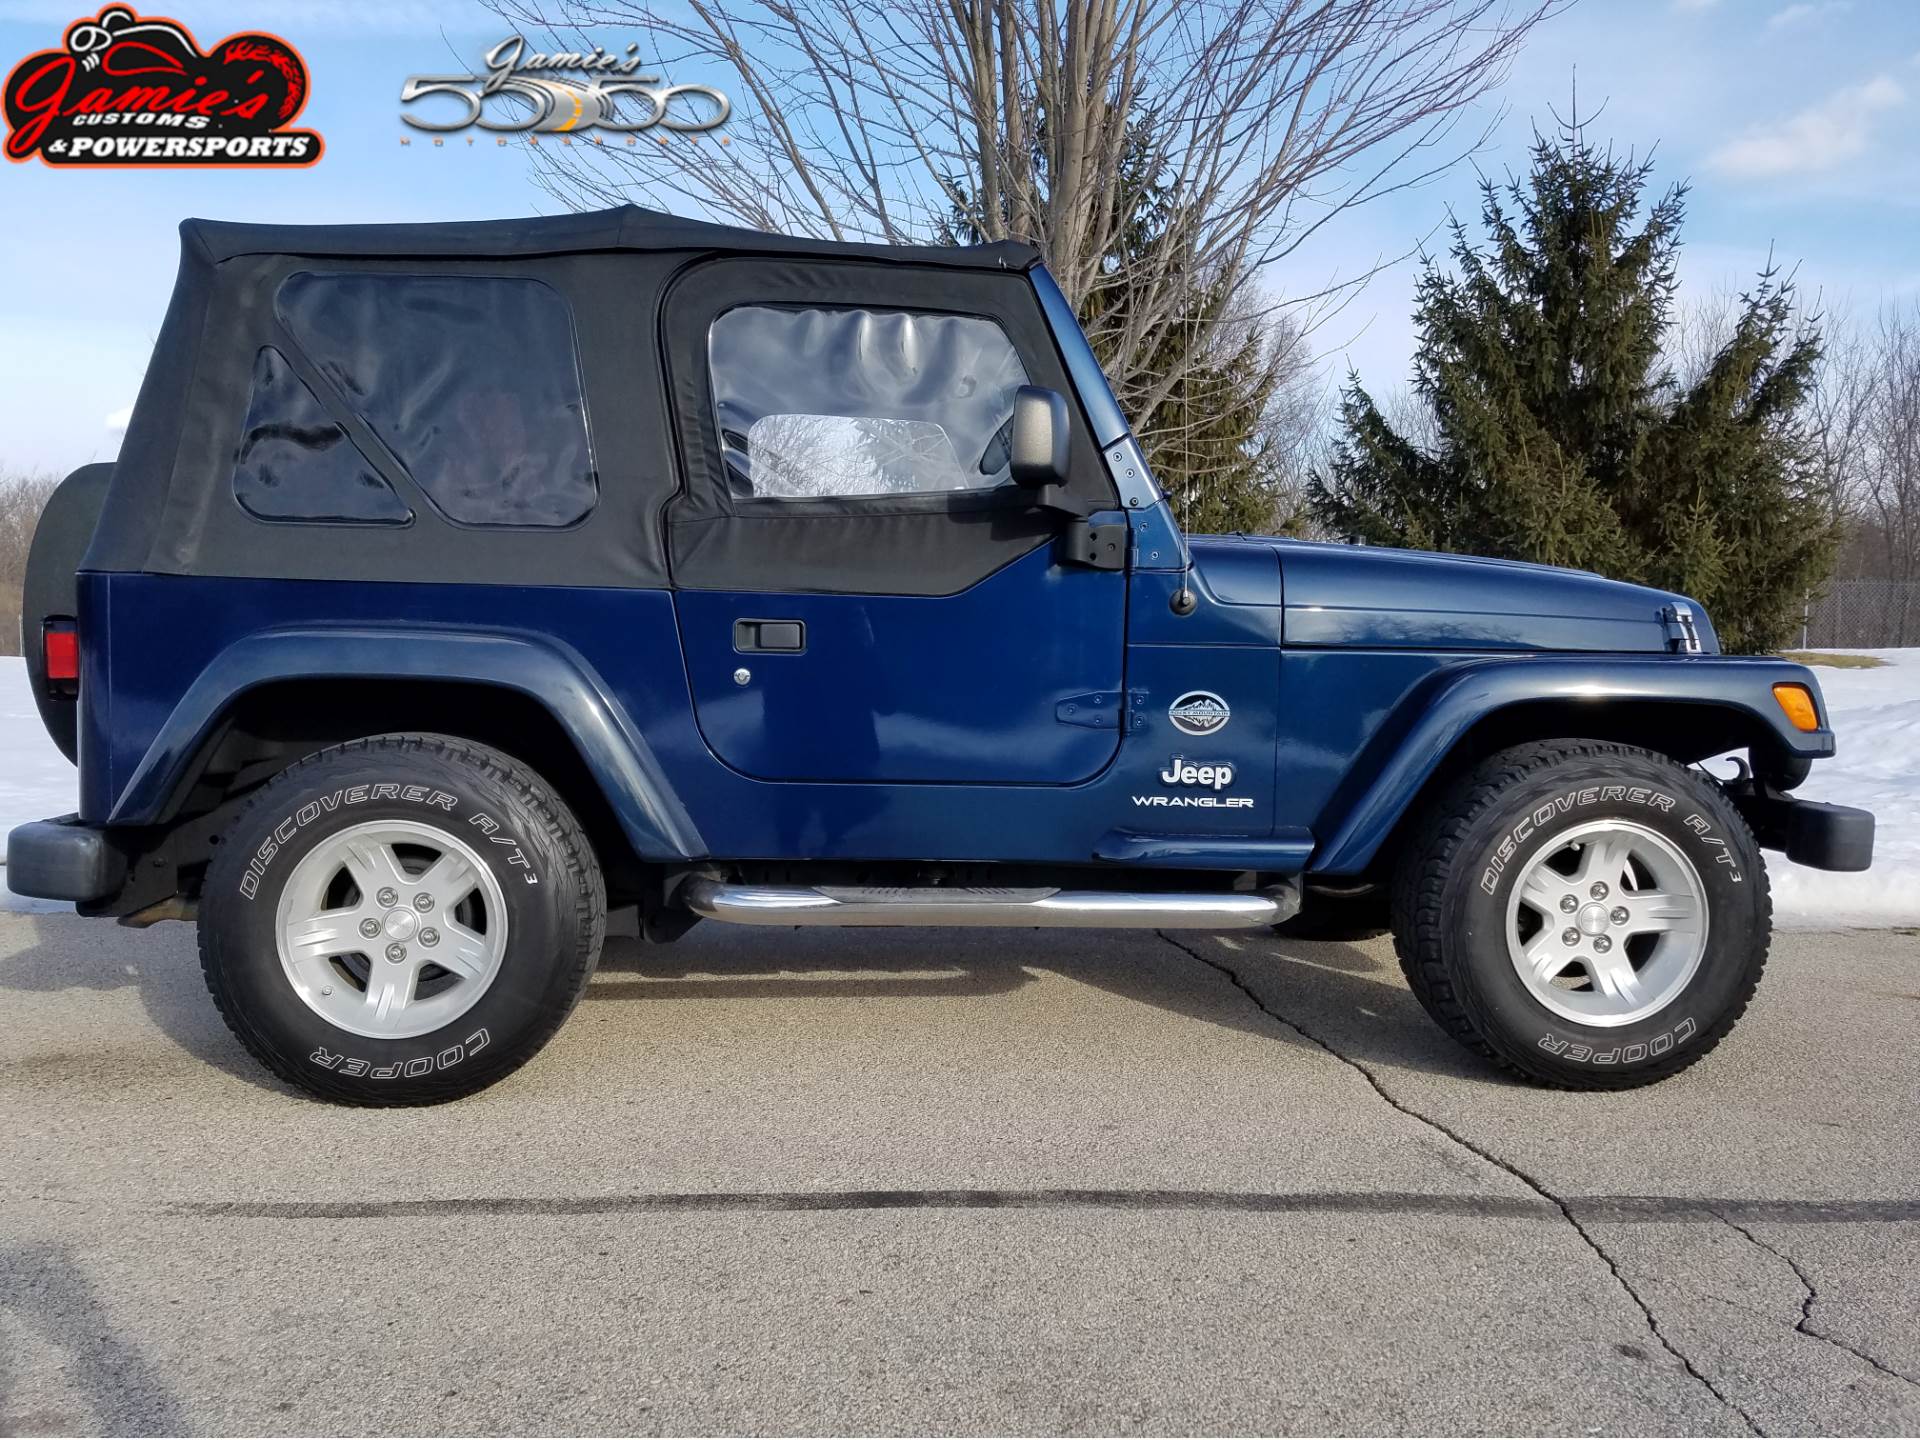 Used 2005 Jeep® Wrangler Rocky Mountain Edition | Automobile in Big Bend WI  | 4125J Patriot Blue